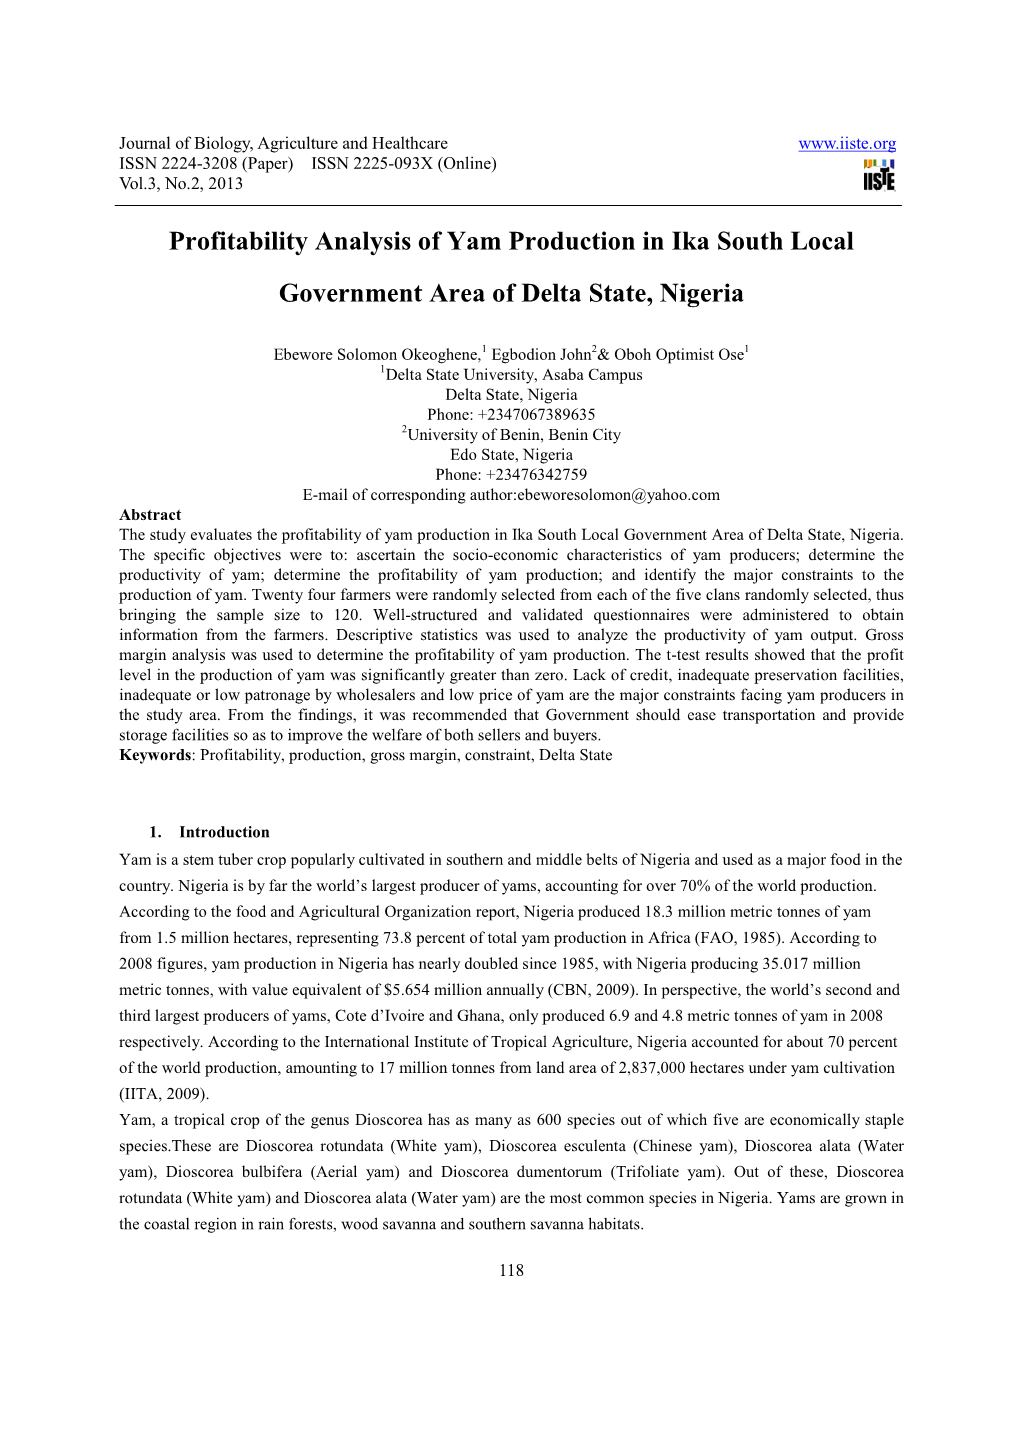 Profitability Analysis of Yam Production in Ika South Local Government Area of Delta State, Nigeria